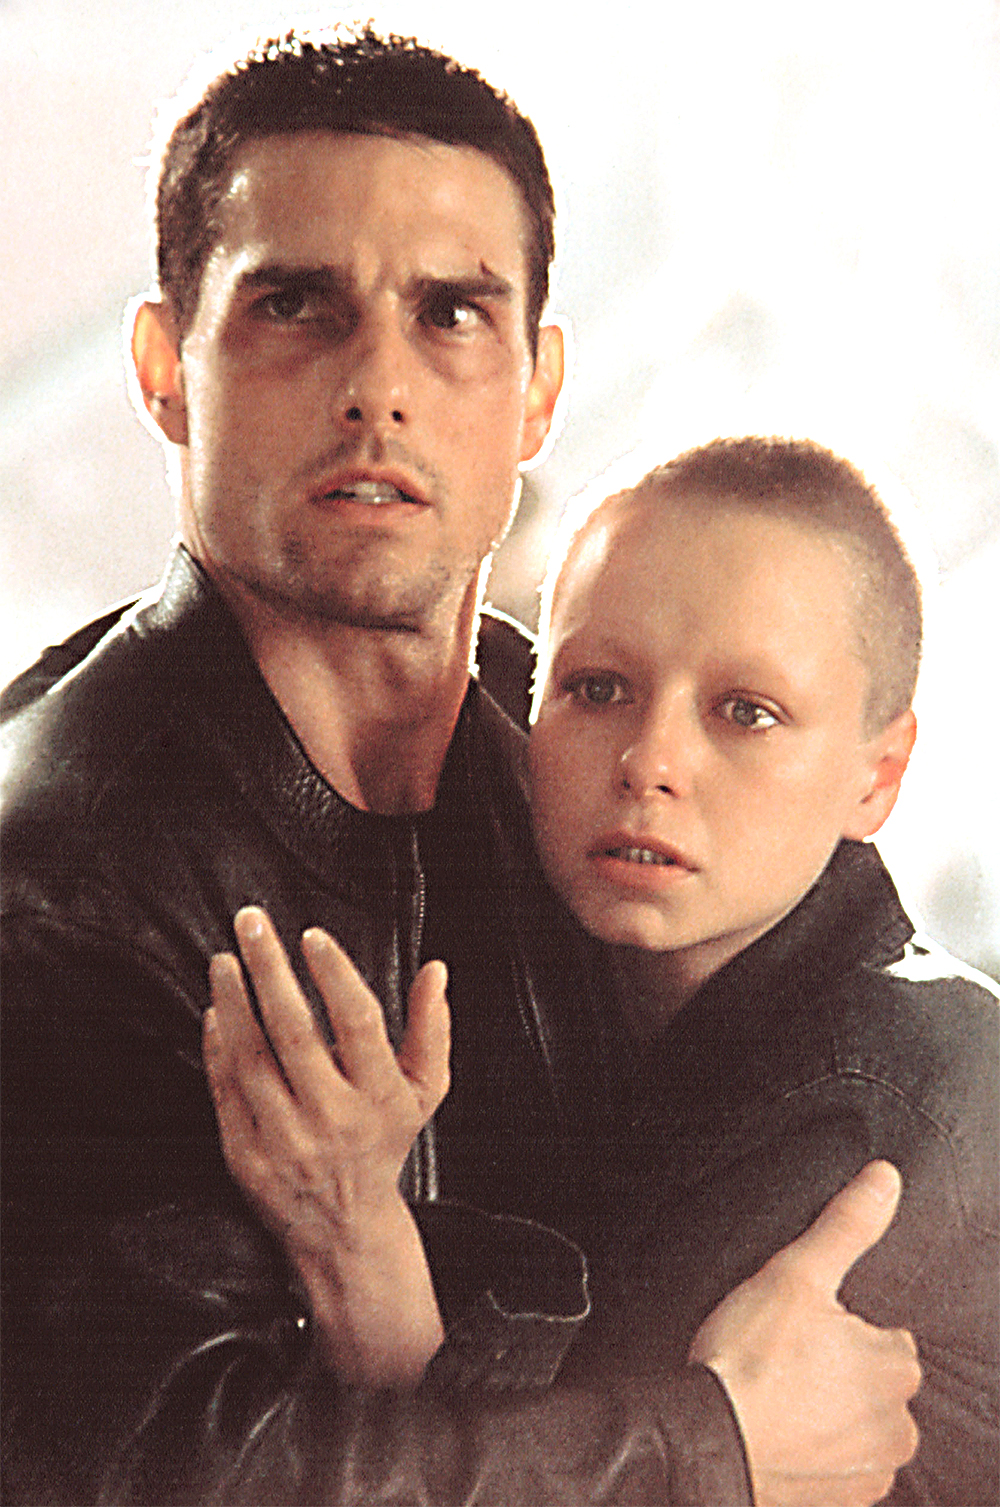 <p>Tom Cruise is seen here in 2002’s ‘Minority Report’. He played Chief John Anderton, the head of a Precrime unit advanced in psychic technology, who is accused of murdering a man he had never even met.</p> <p>The movie is adapted from a 1956 novella. Also starring Colin Farrell and Samantha Morton, the film earned over $358 million worldwide off of an overall budget of $142 million.</p>